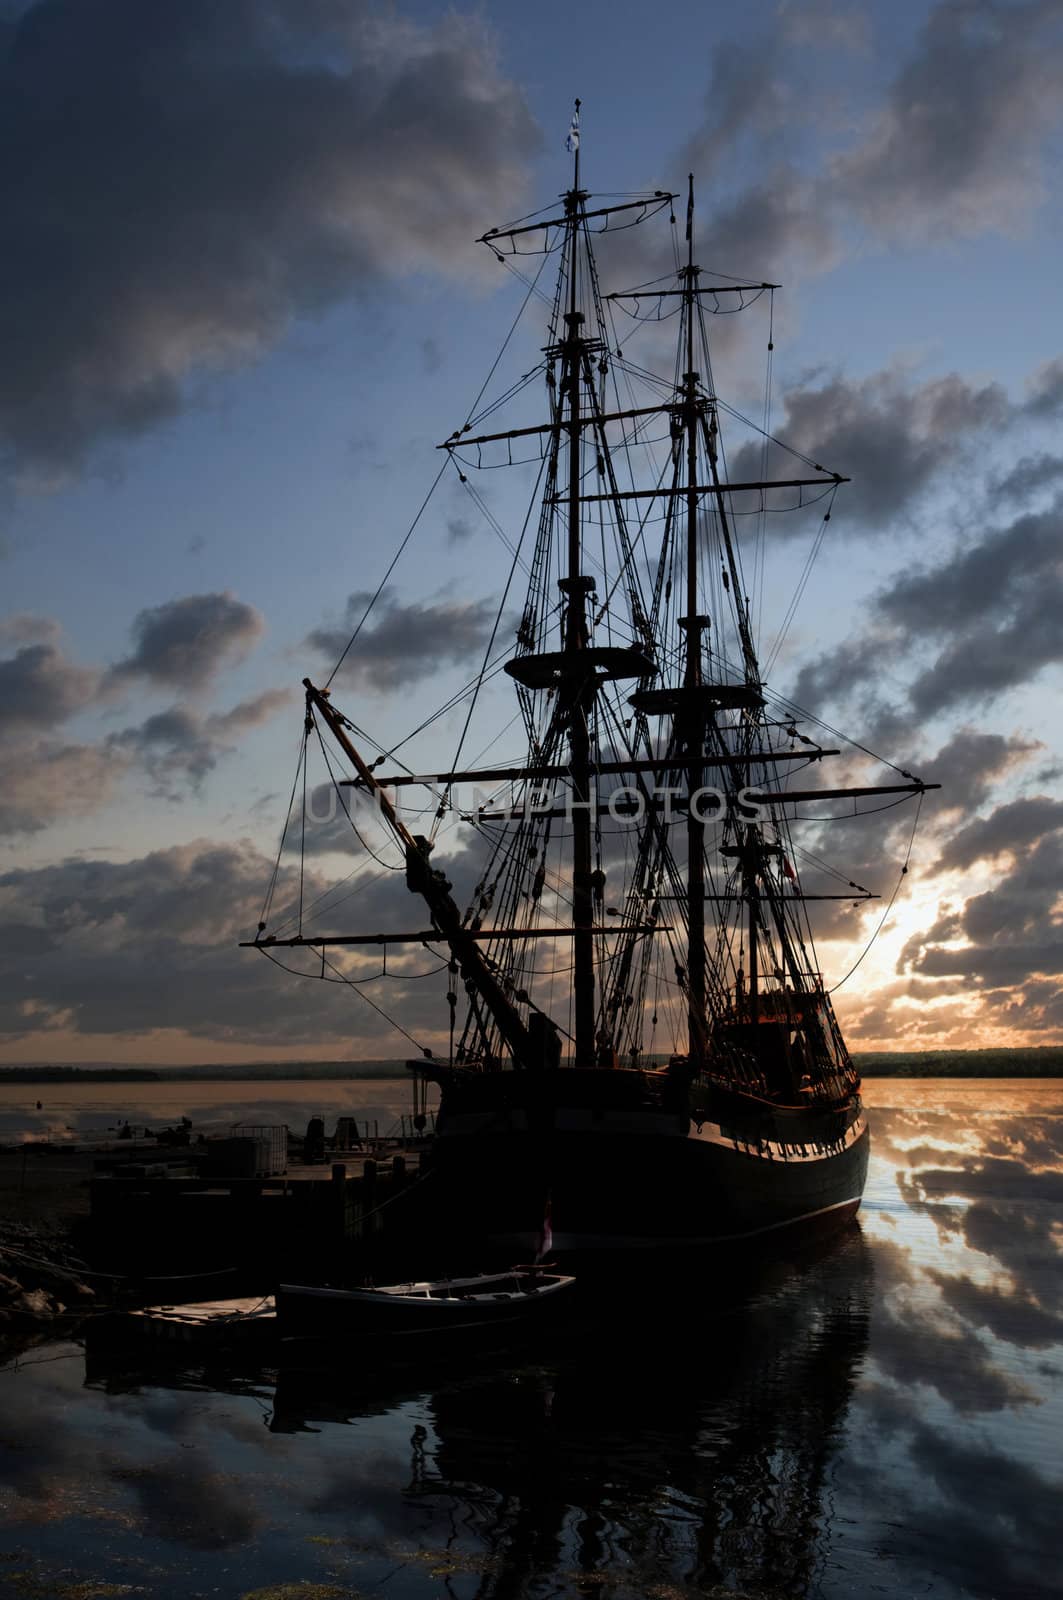 Vintage 18th century sailboat docked in the harbour at sunset in Nova Scotia